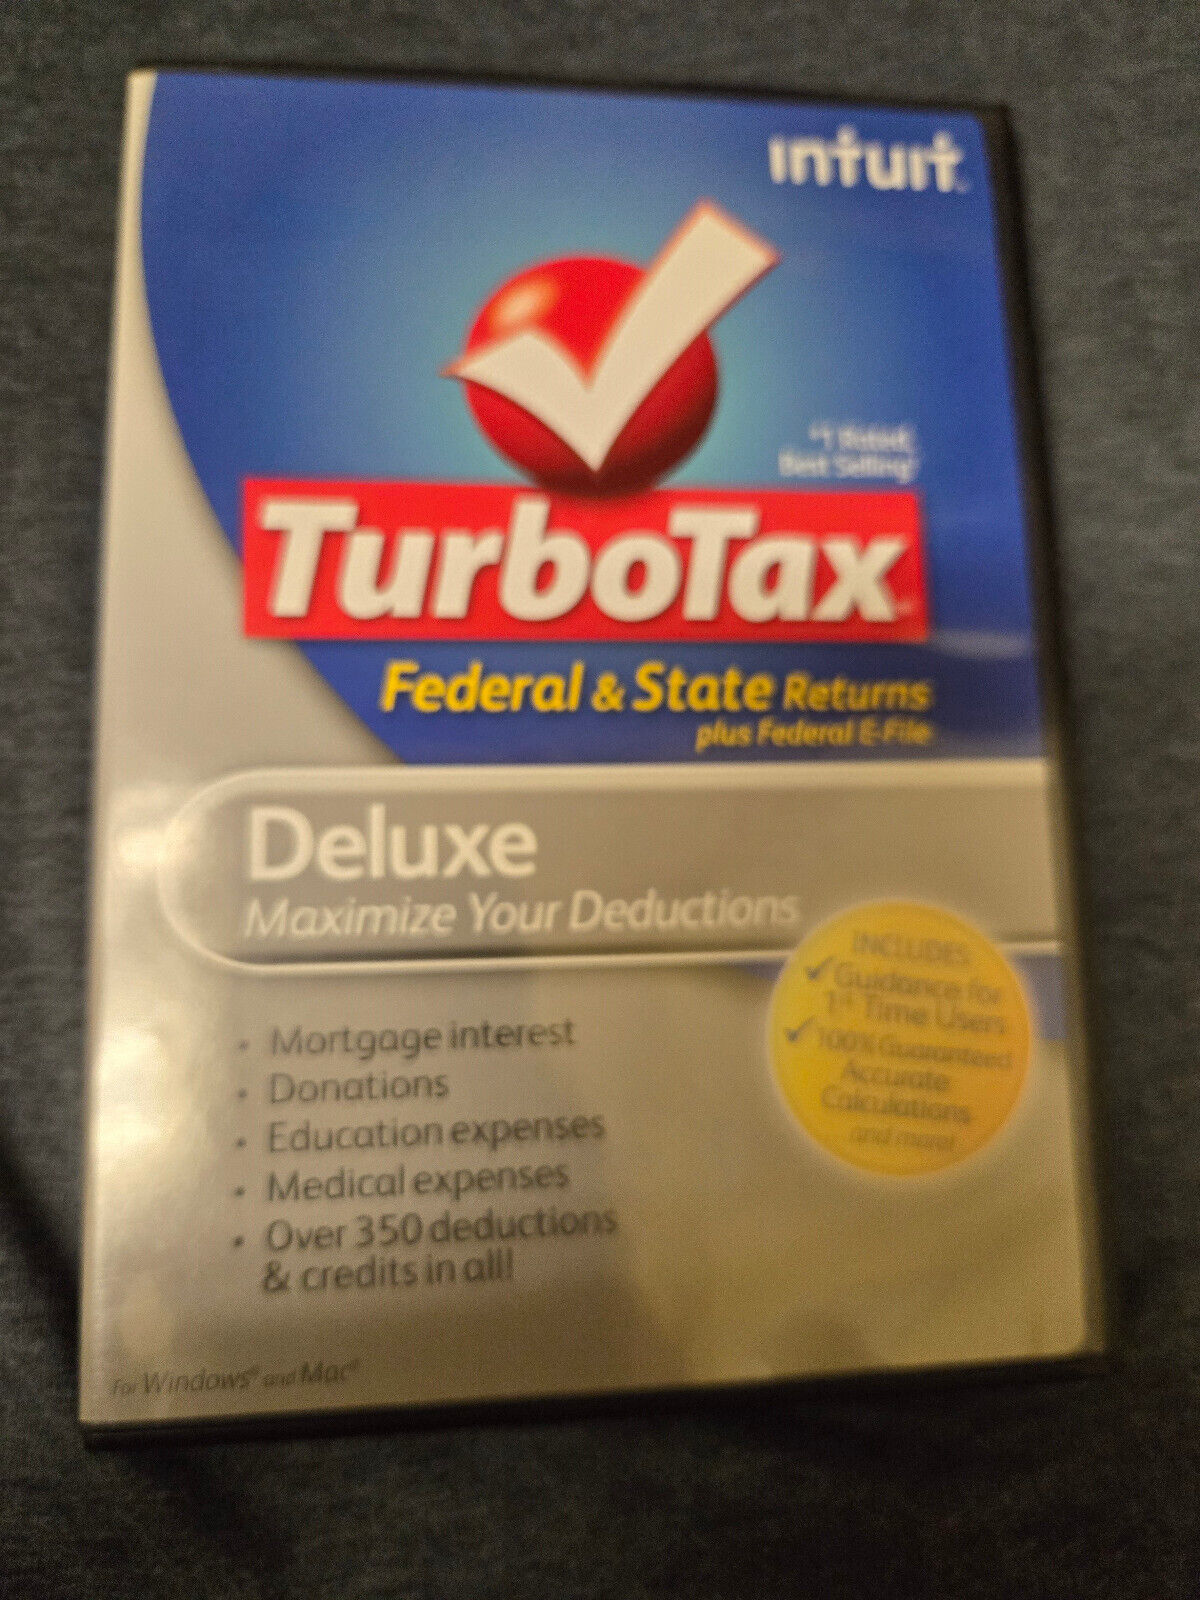 Turbotax Deluxe 2011 Federal & State Returns E-file Intuit Quicken CD Software